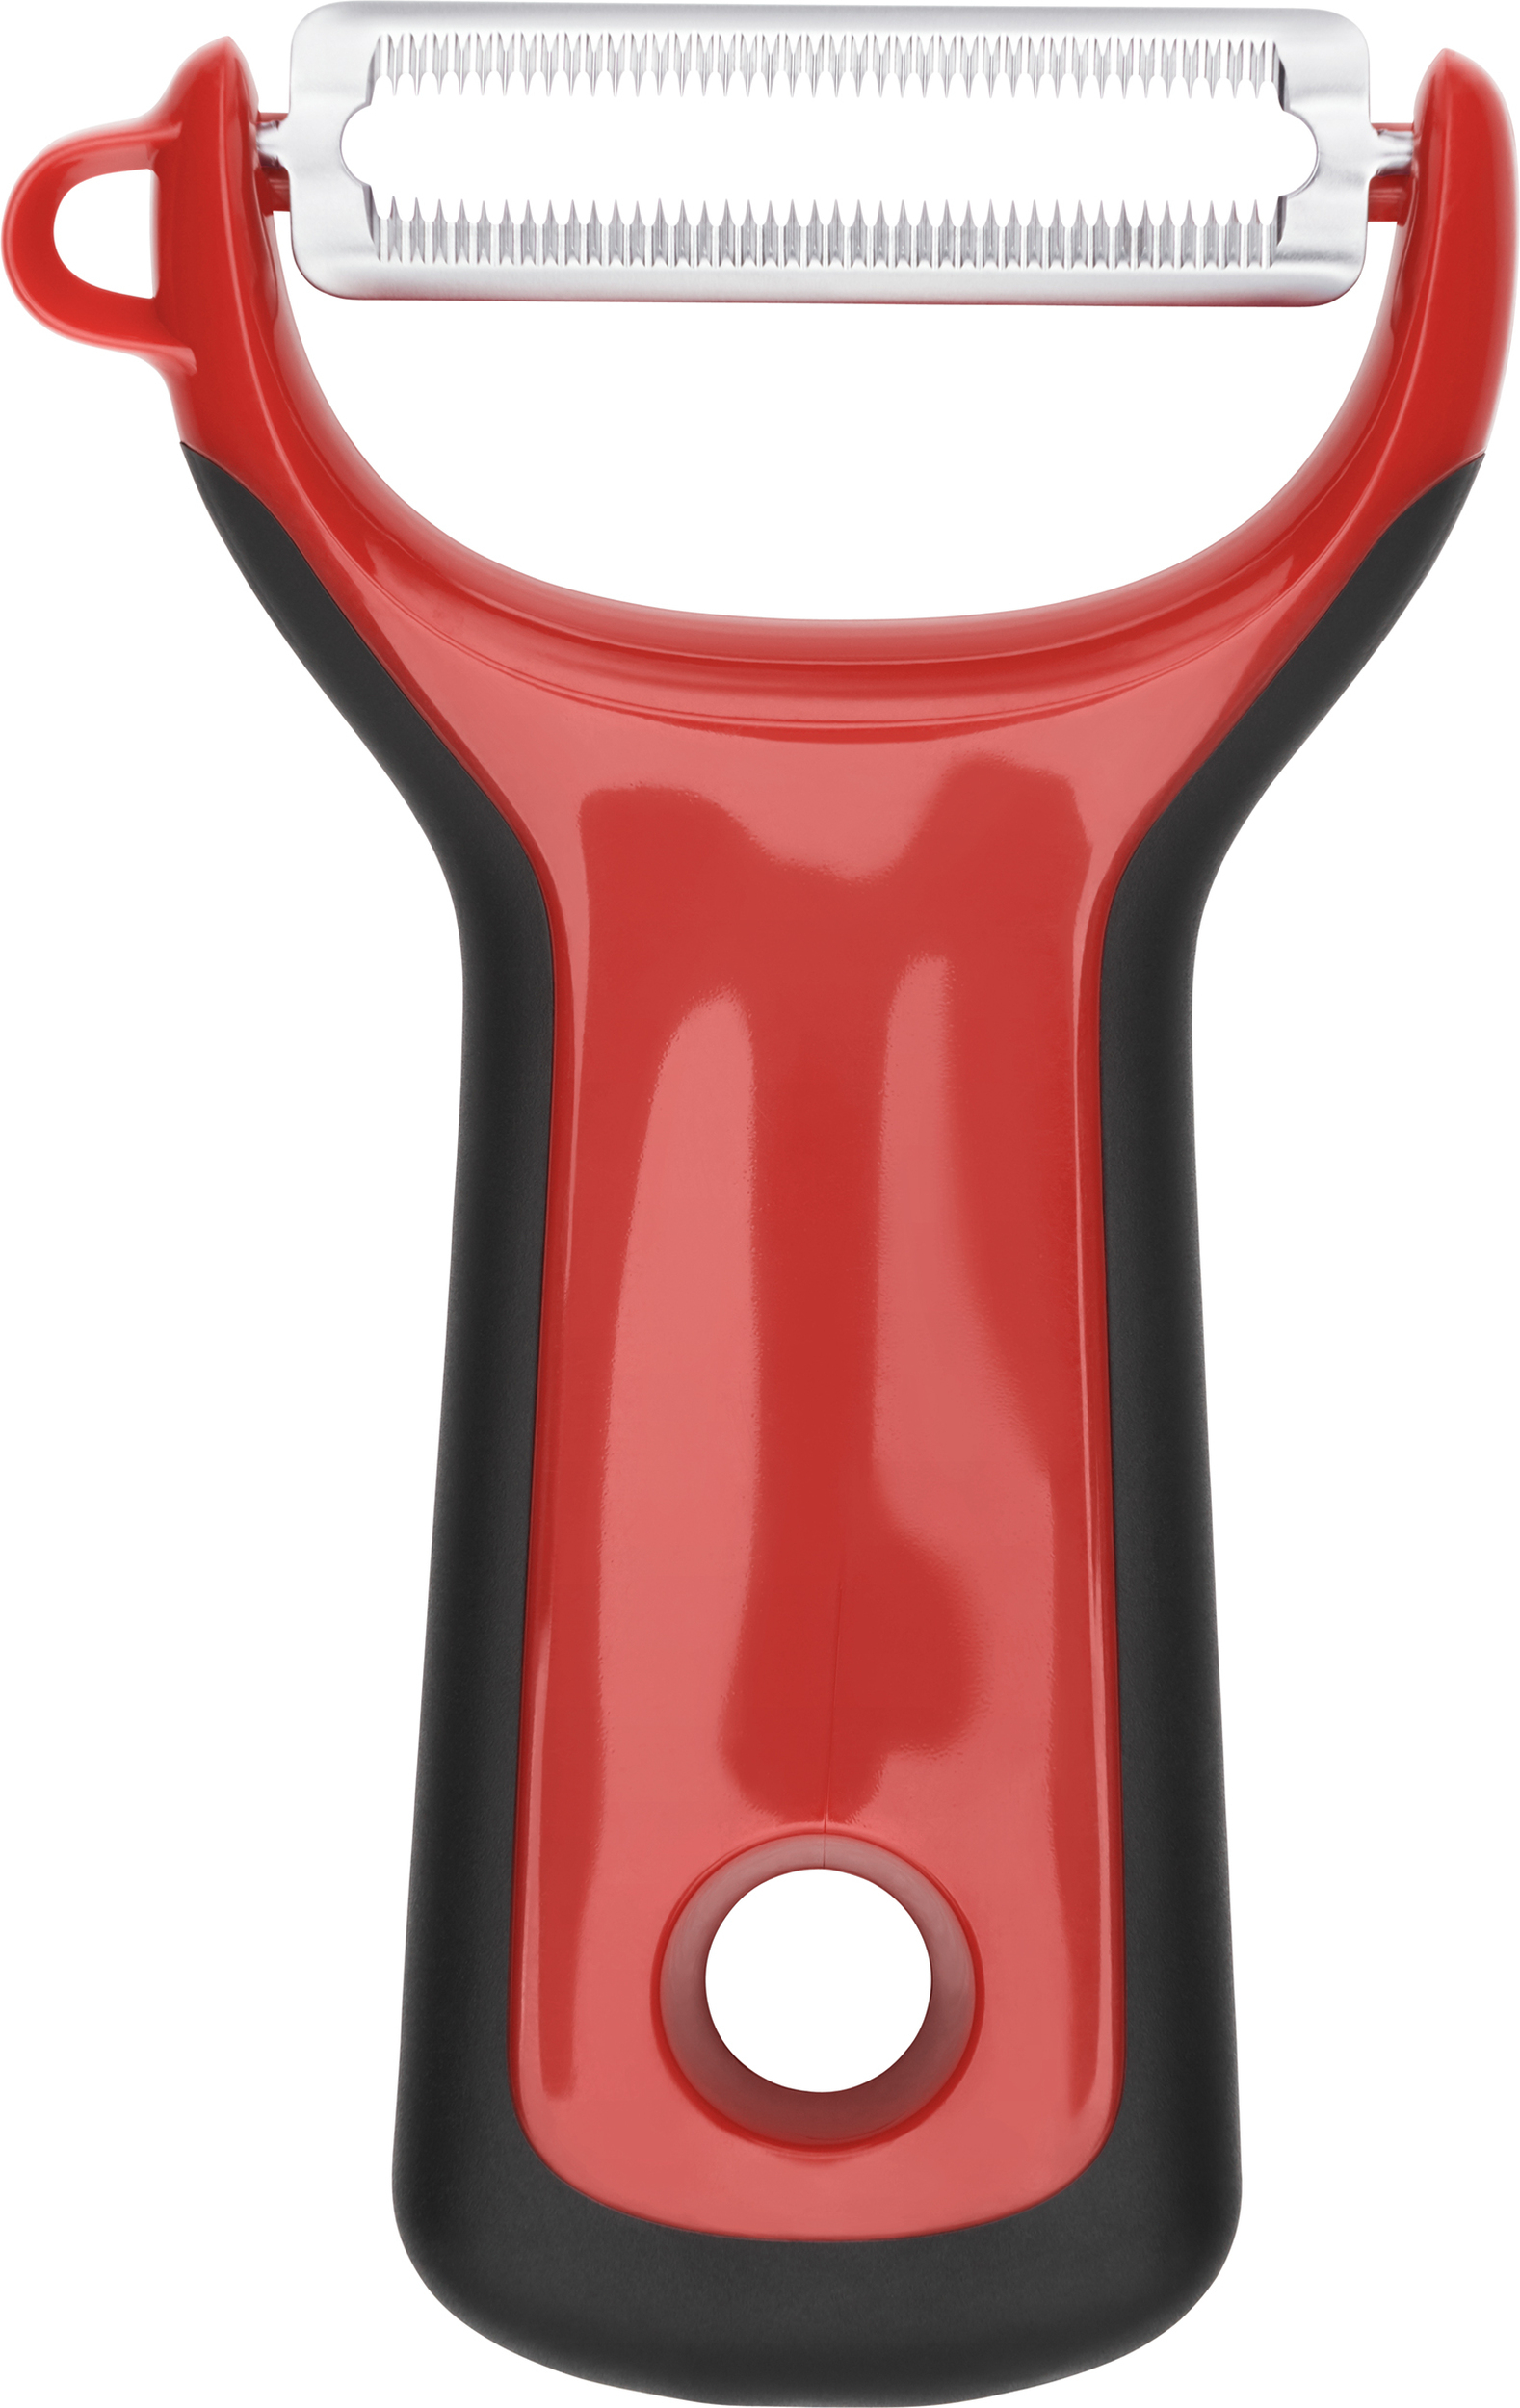 LACOR Serrated Tomato Peeler, One Size, Red